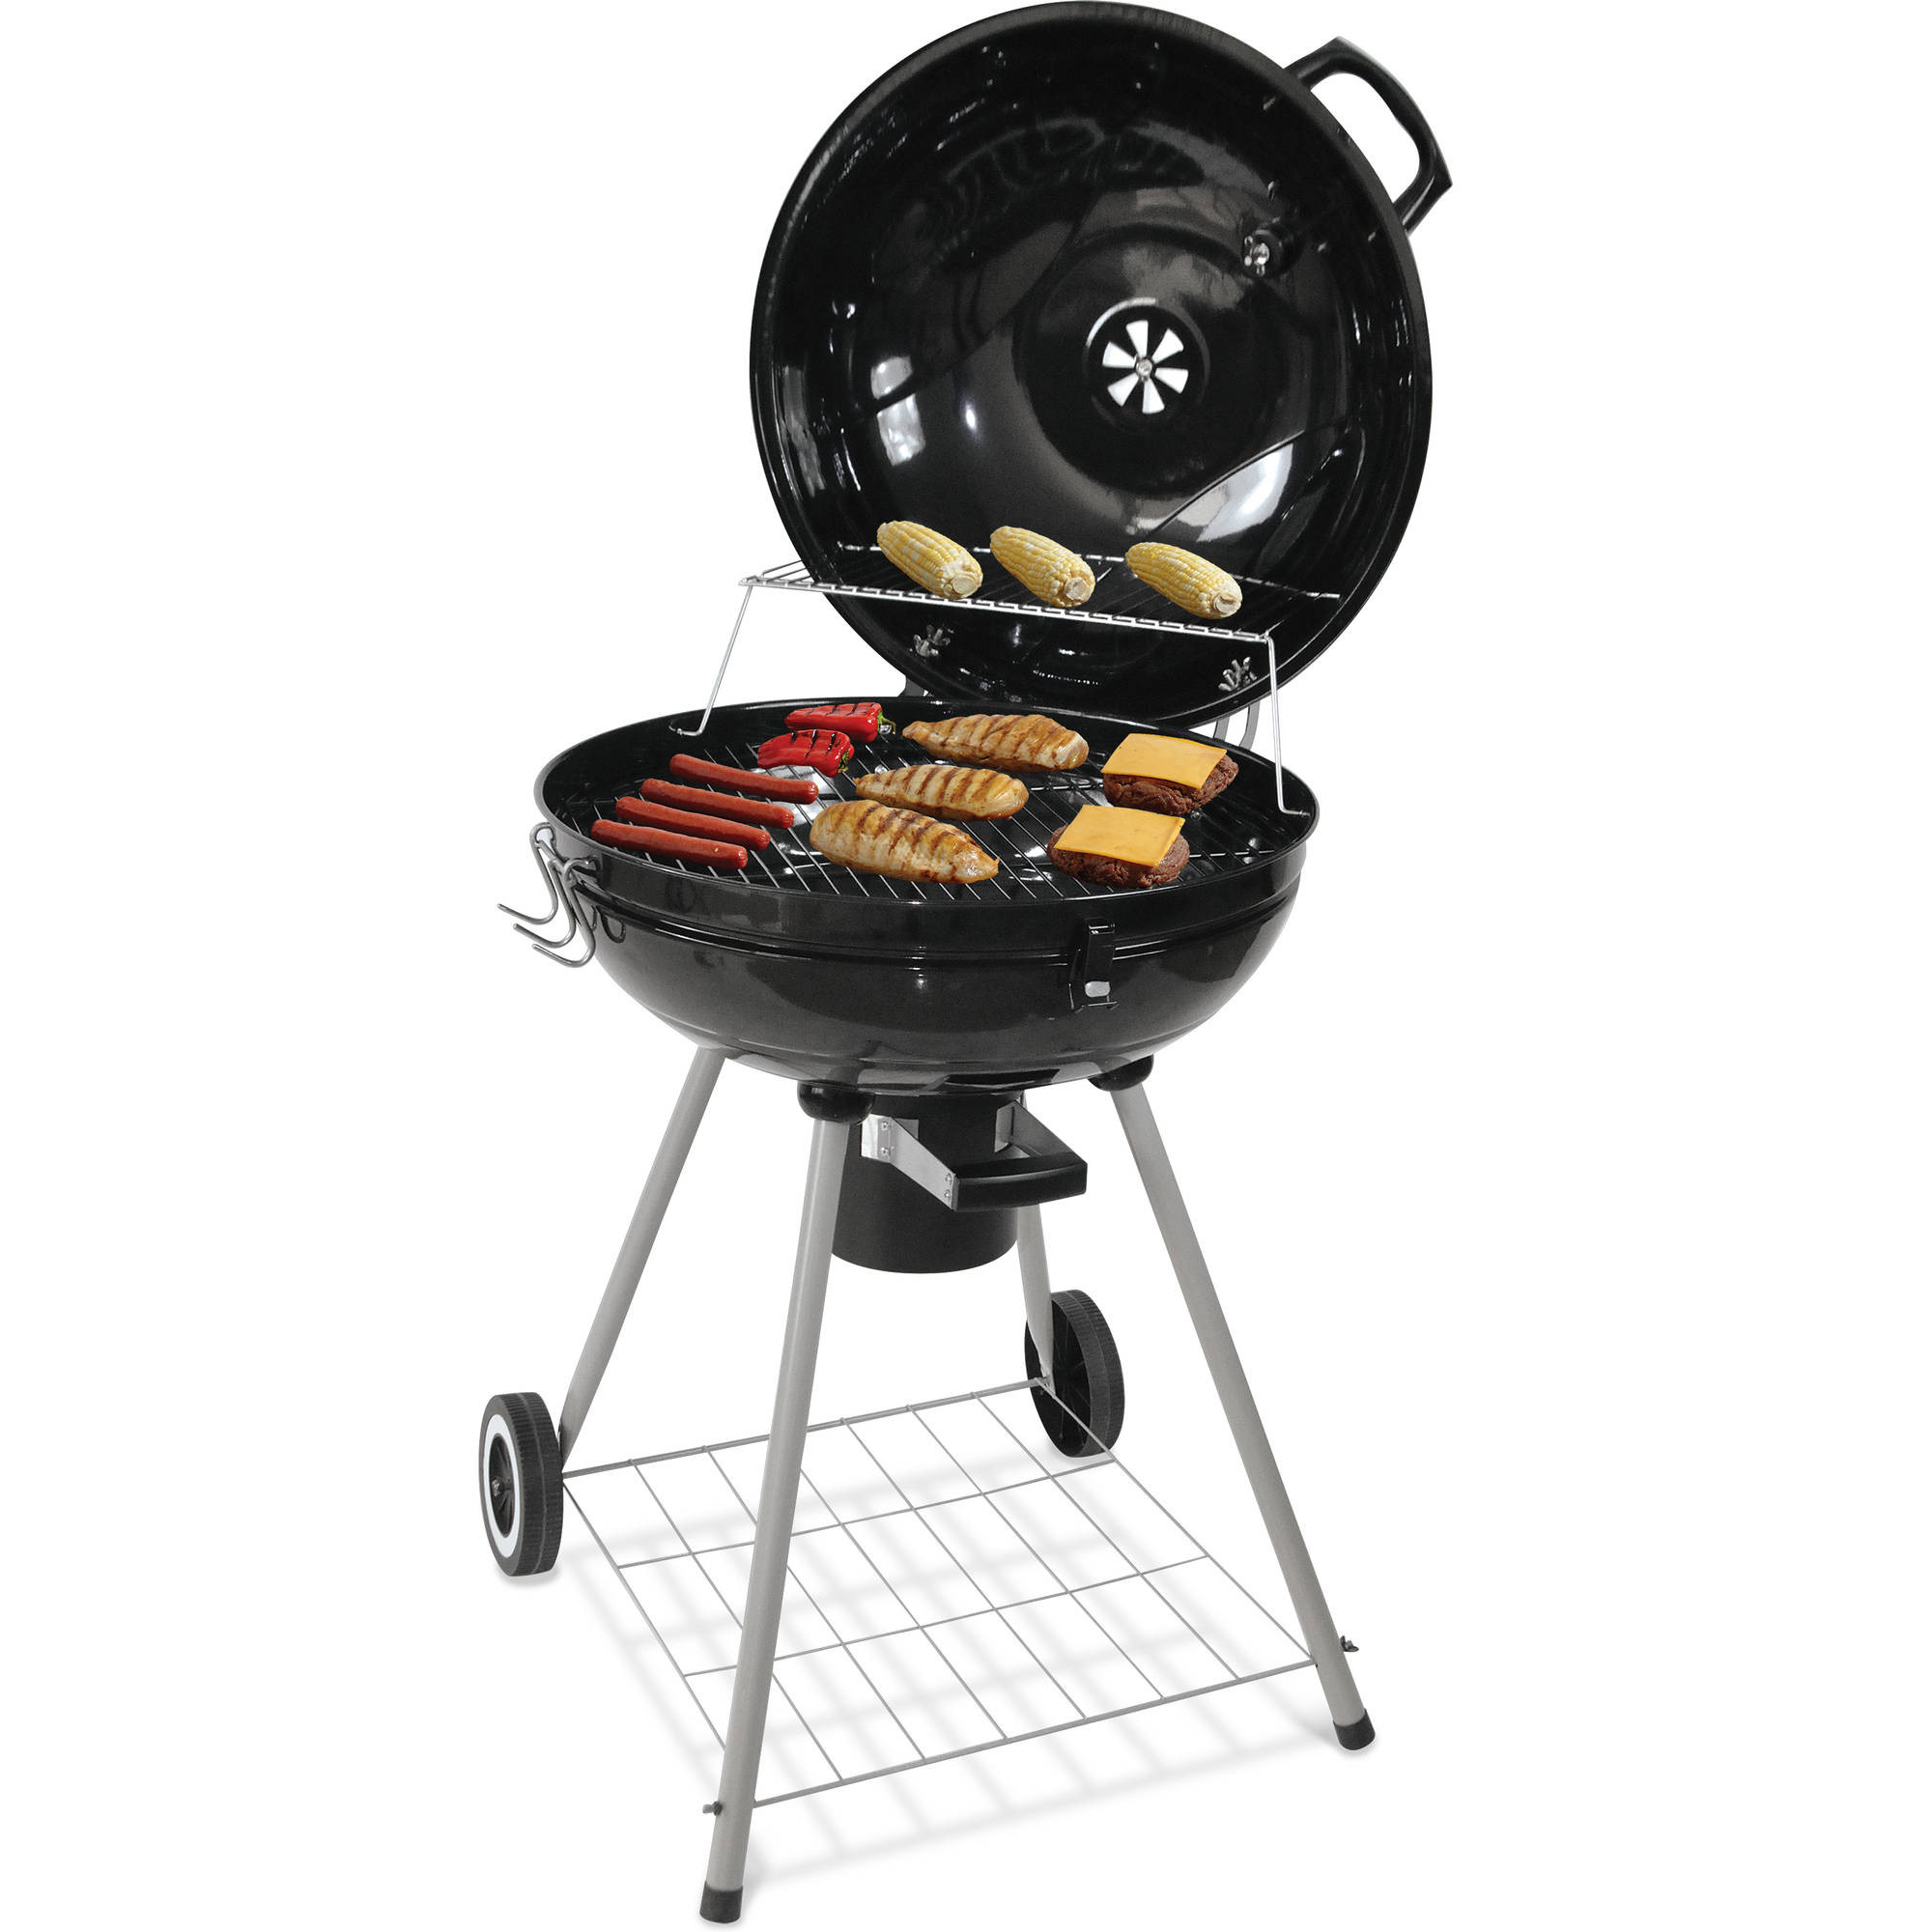 Backyard Grill Grills
 BACKYARD GRILL BY16 102 002 03 22 5" Charcoal Kettle Grill